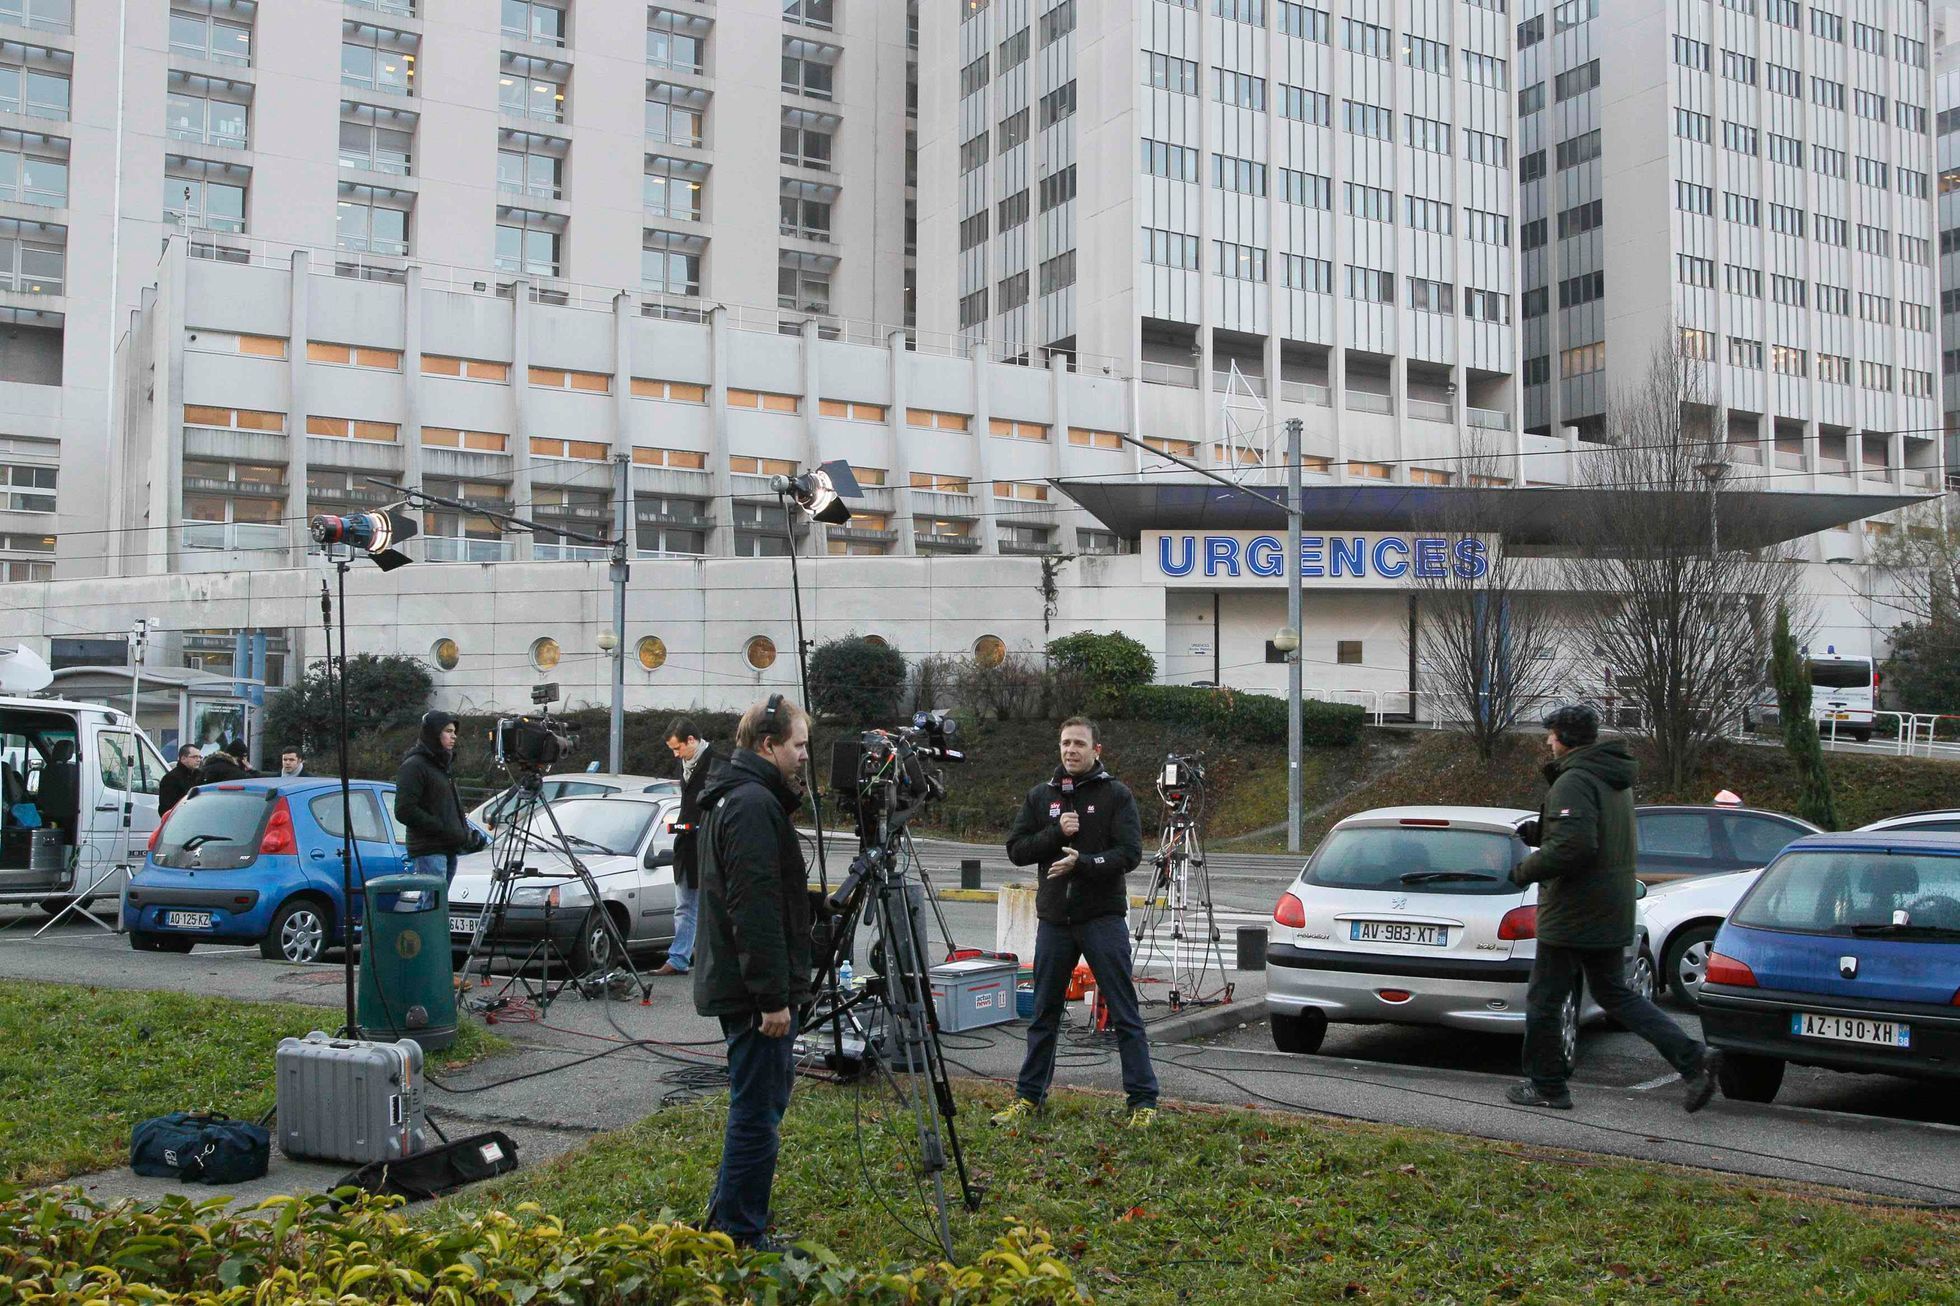 Journalists work in front of the entrance of the emergency services at the CHU Nord hospital in Grenoble, French Alps, where retired seven-times Formula One world champion Michael Schumacher is hospit